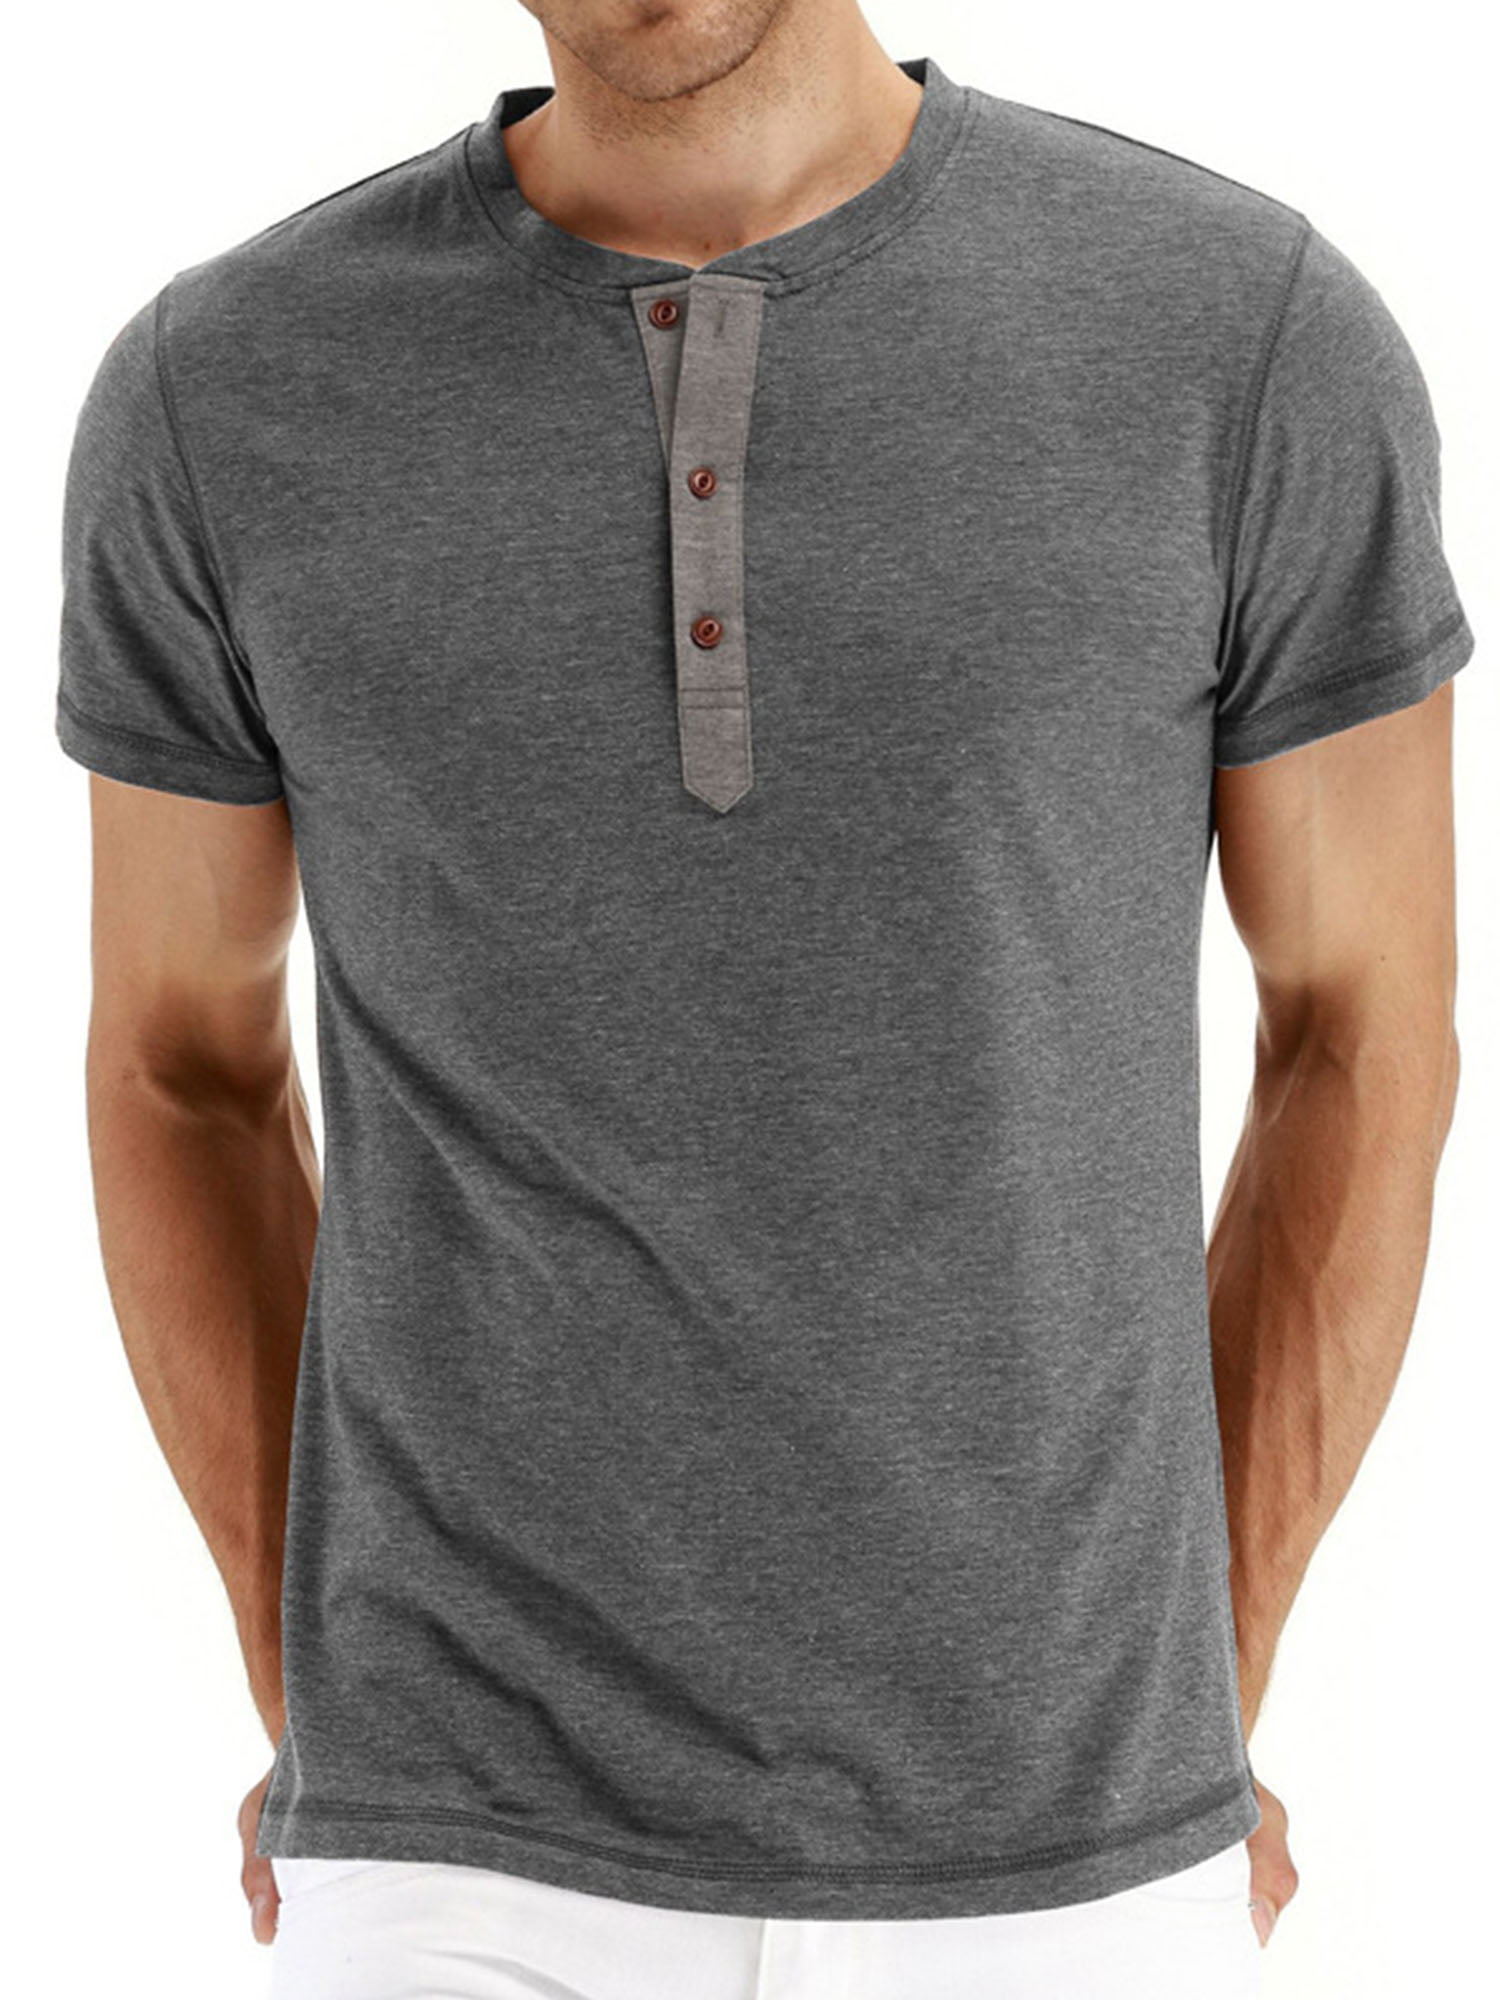 Slim Fit T-Shirts Men Casual Tee Blouse ...